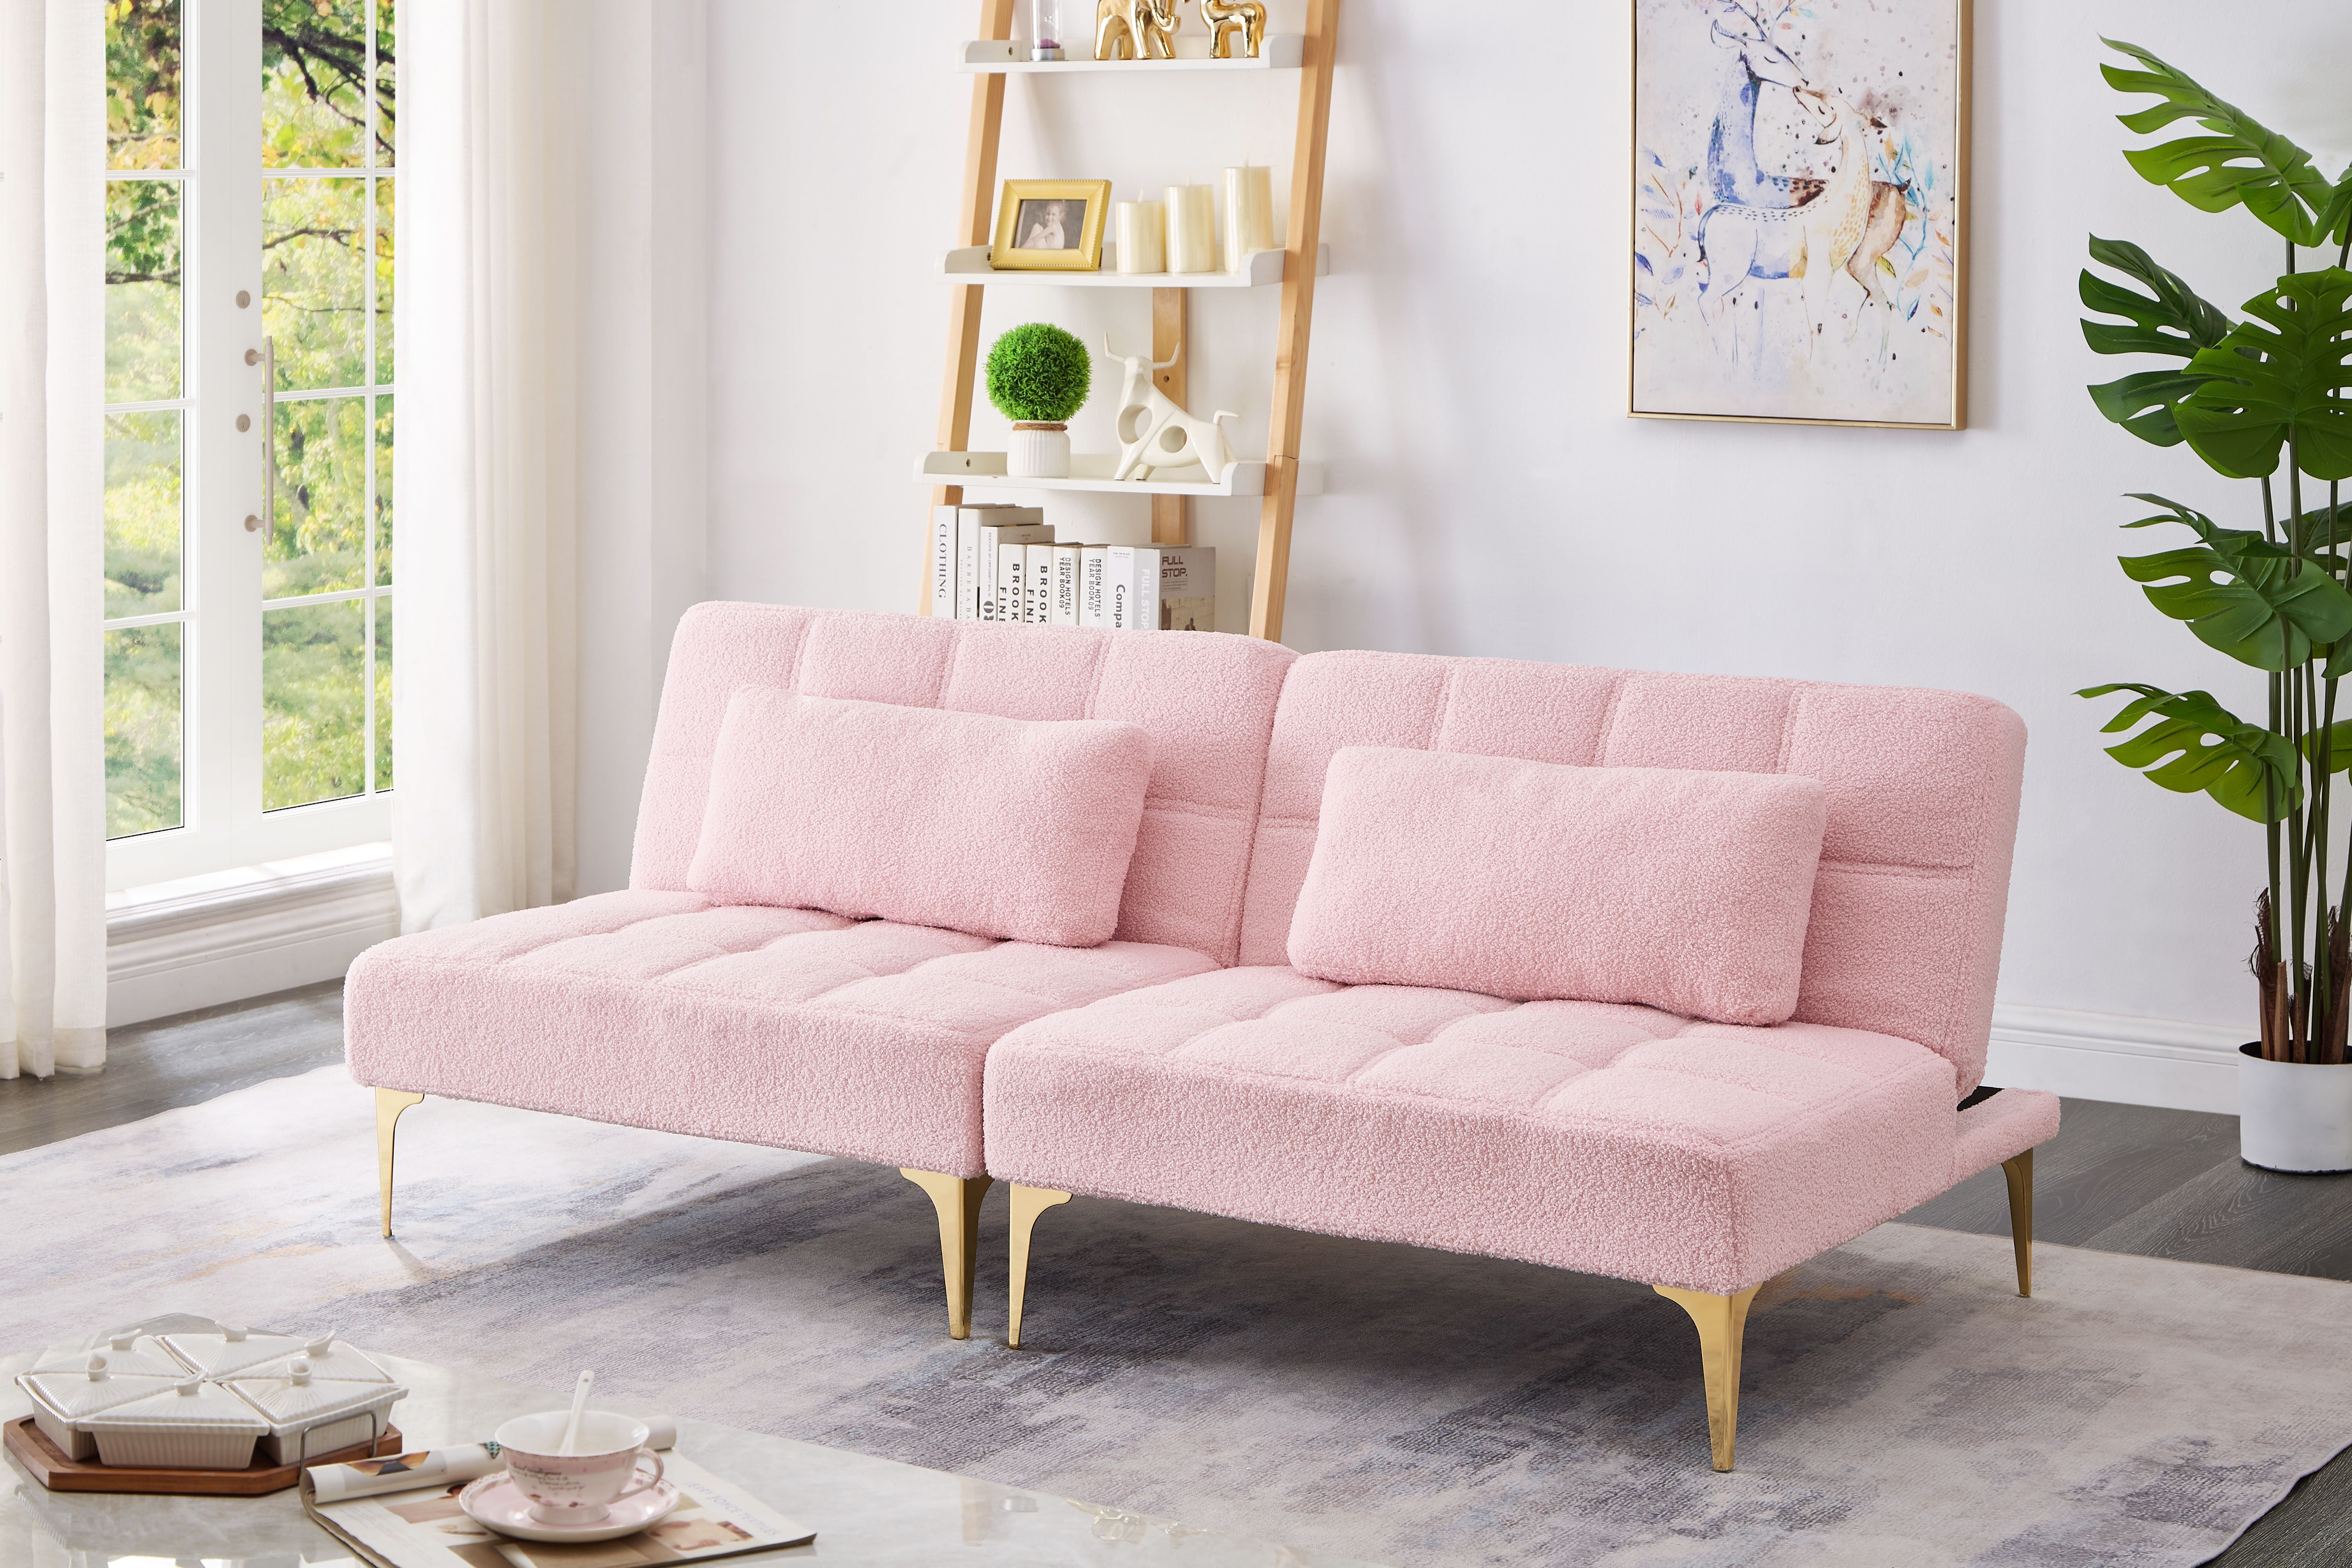 71" Convertible Sofa Bed Futon With Gold Metal Legs Teddy Fabric (Pink)